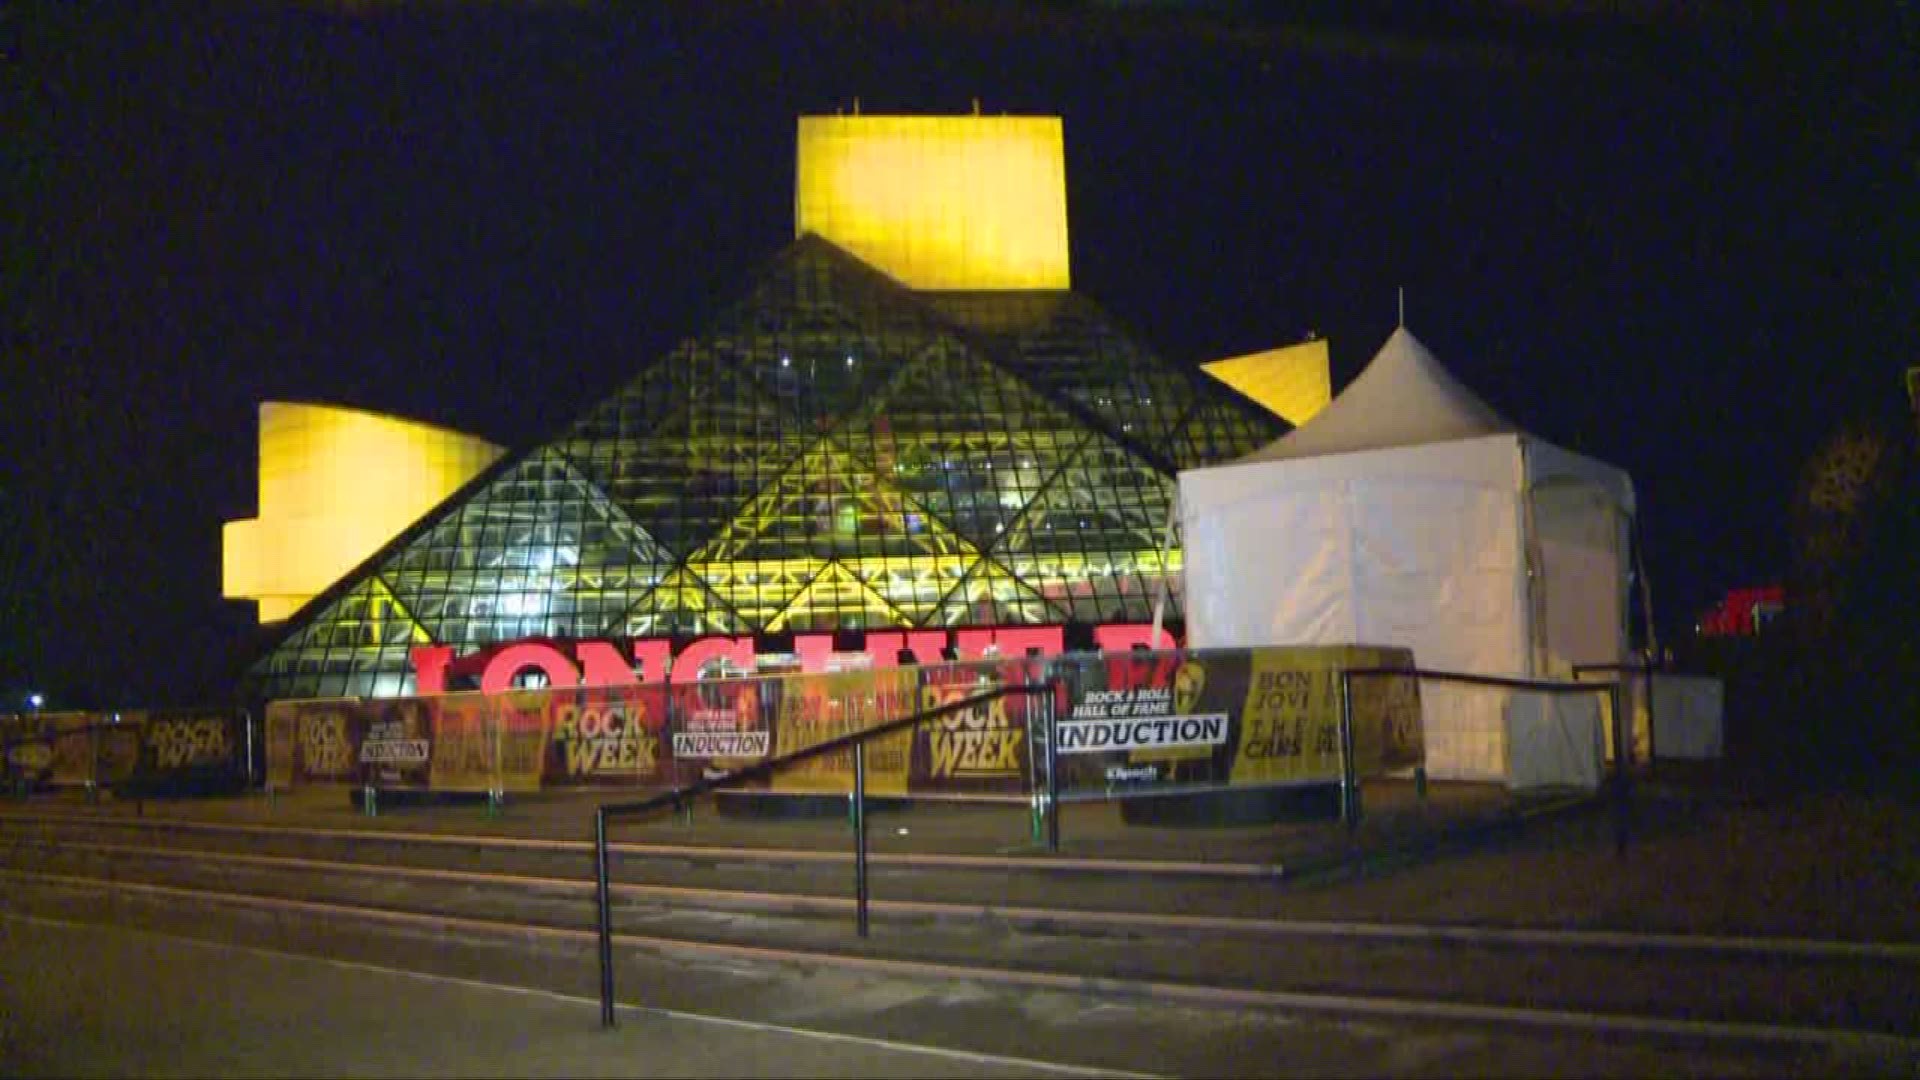 April 11, 2018: Cleveland is preparing to host the 2018 Rock and Roll Hall of Fame induction ceremony, which includes Bon Jovi, Dire Straits and The Cars.